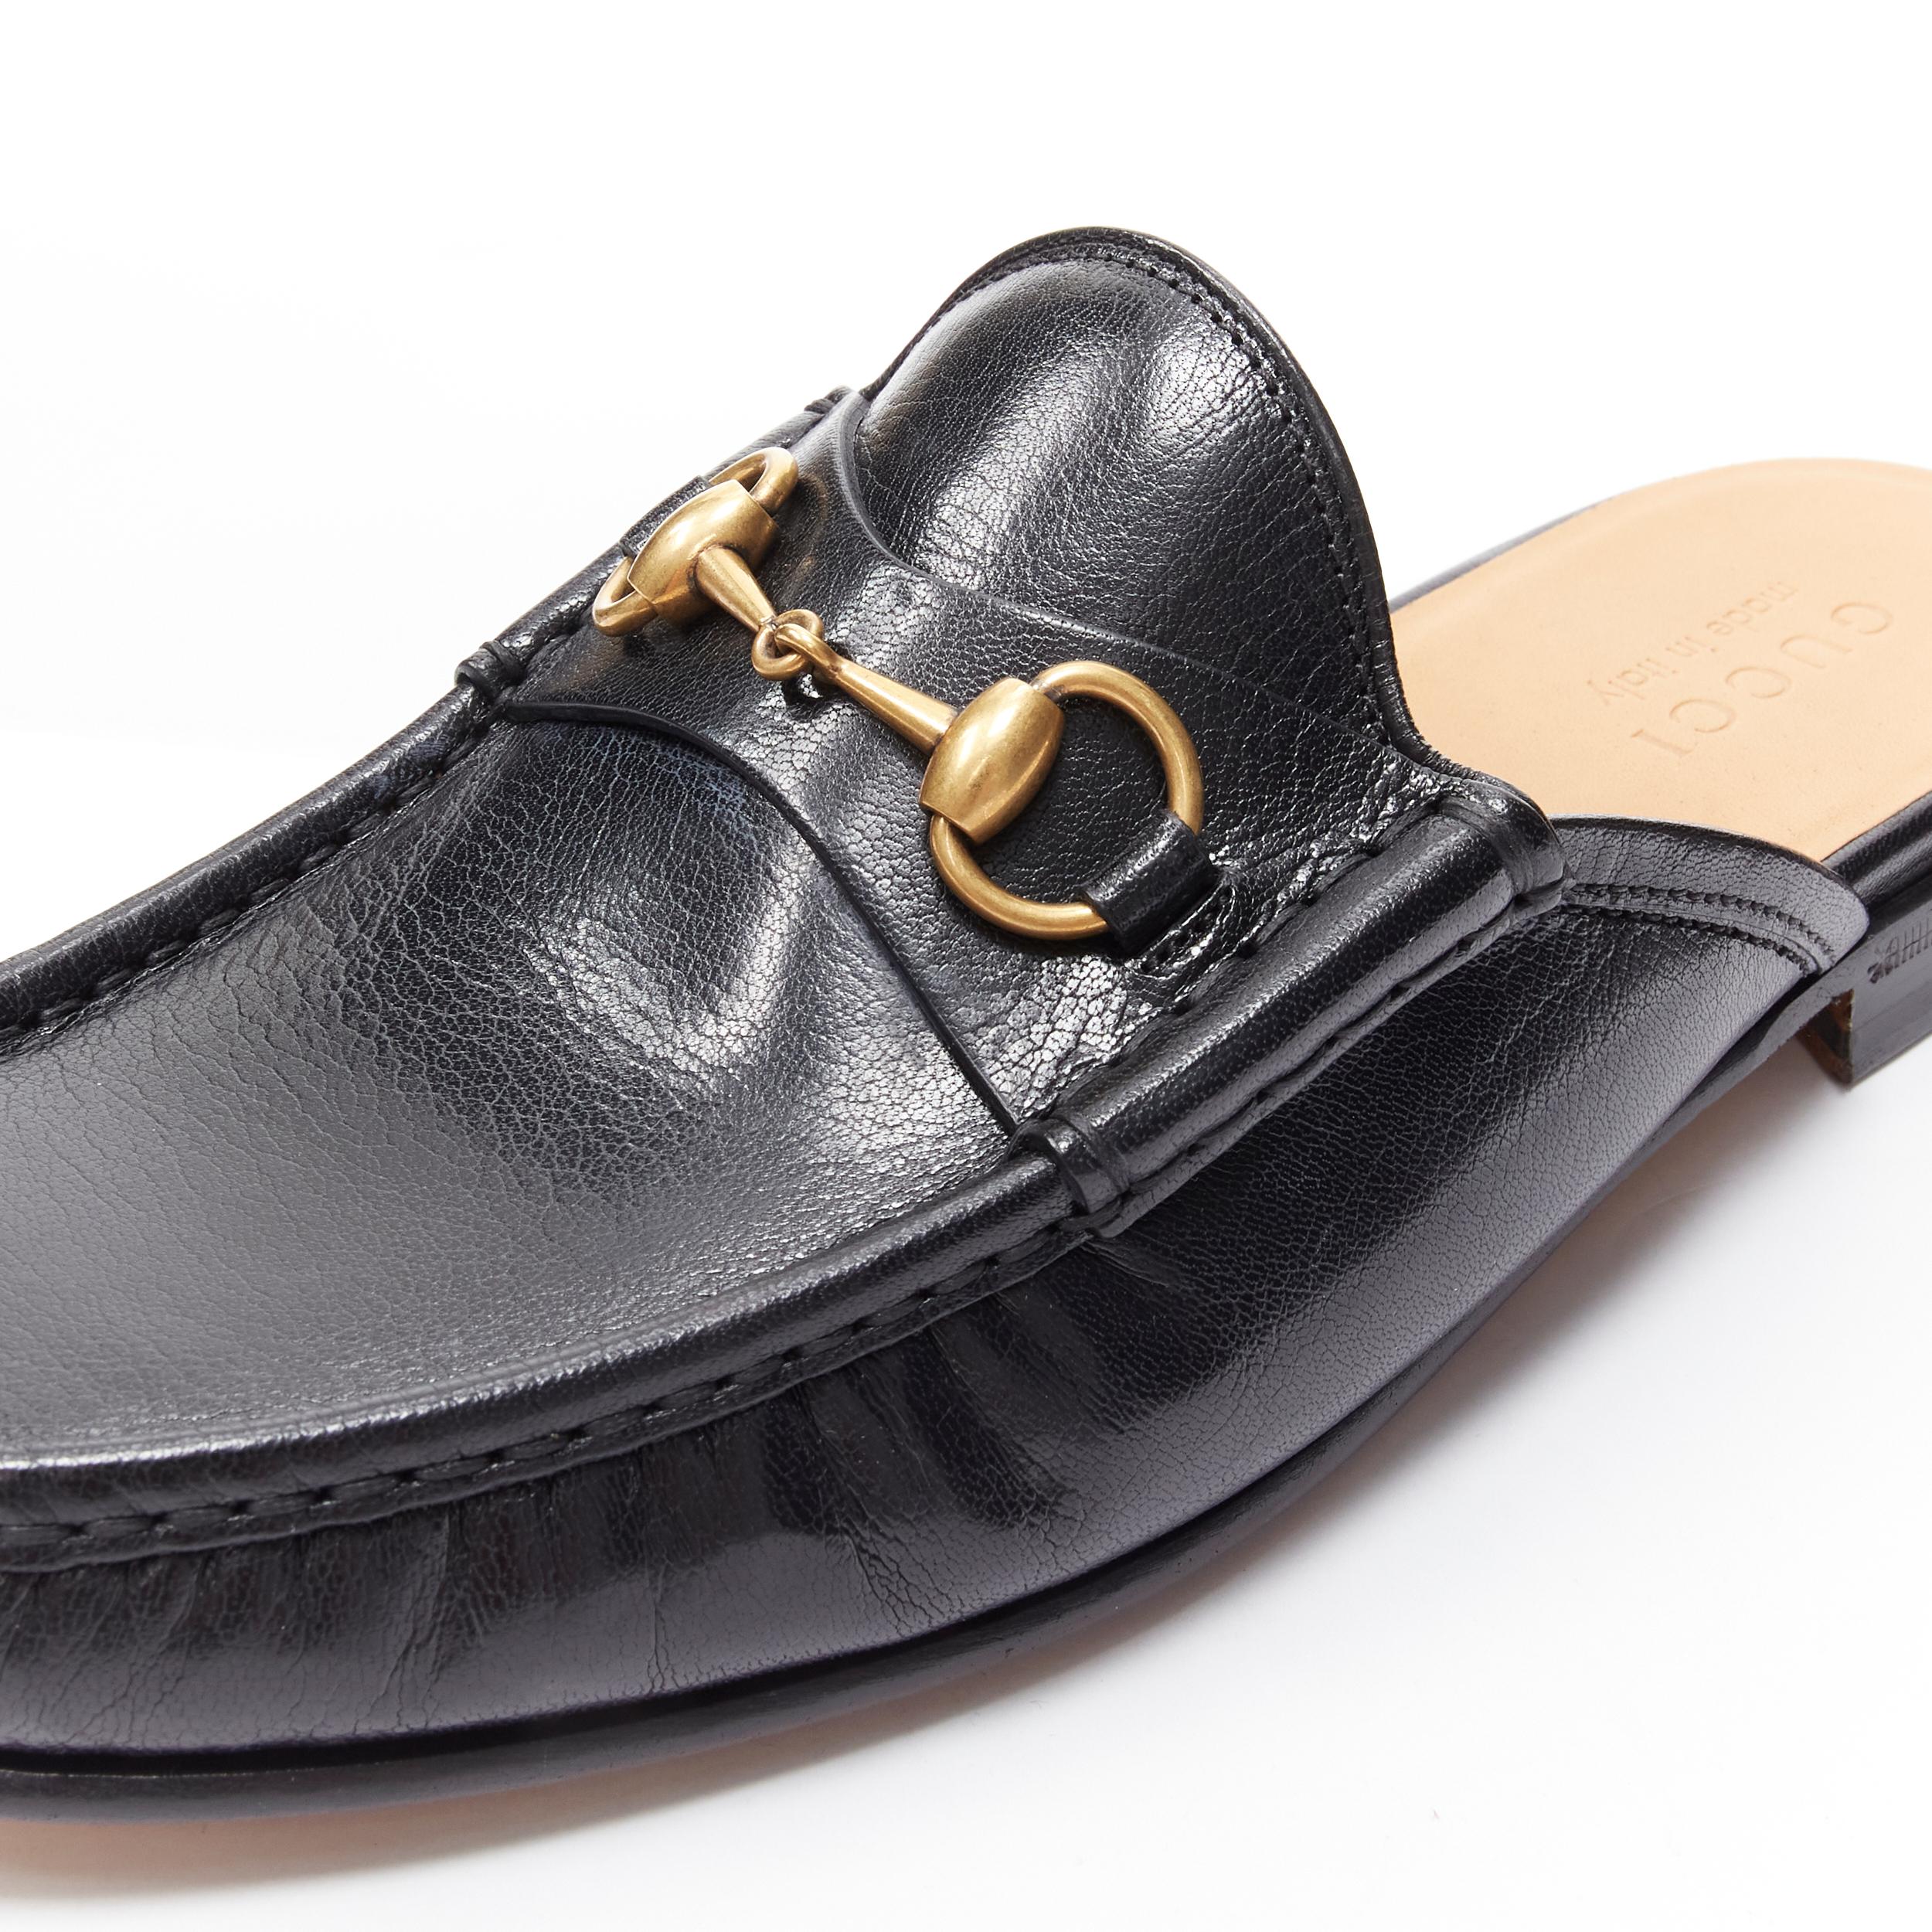 new GUCCI Quentin Nero black leather gold Horsebit slip on loafer UK8.5 US9.5  2